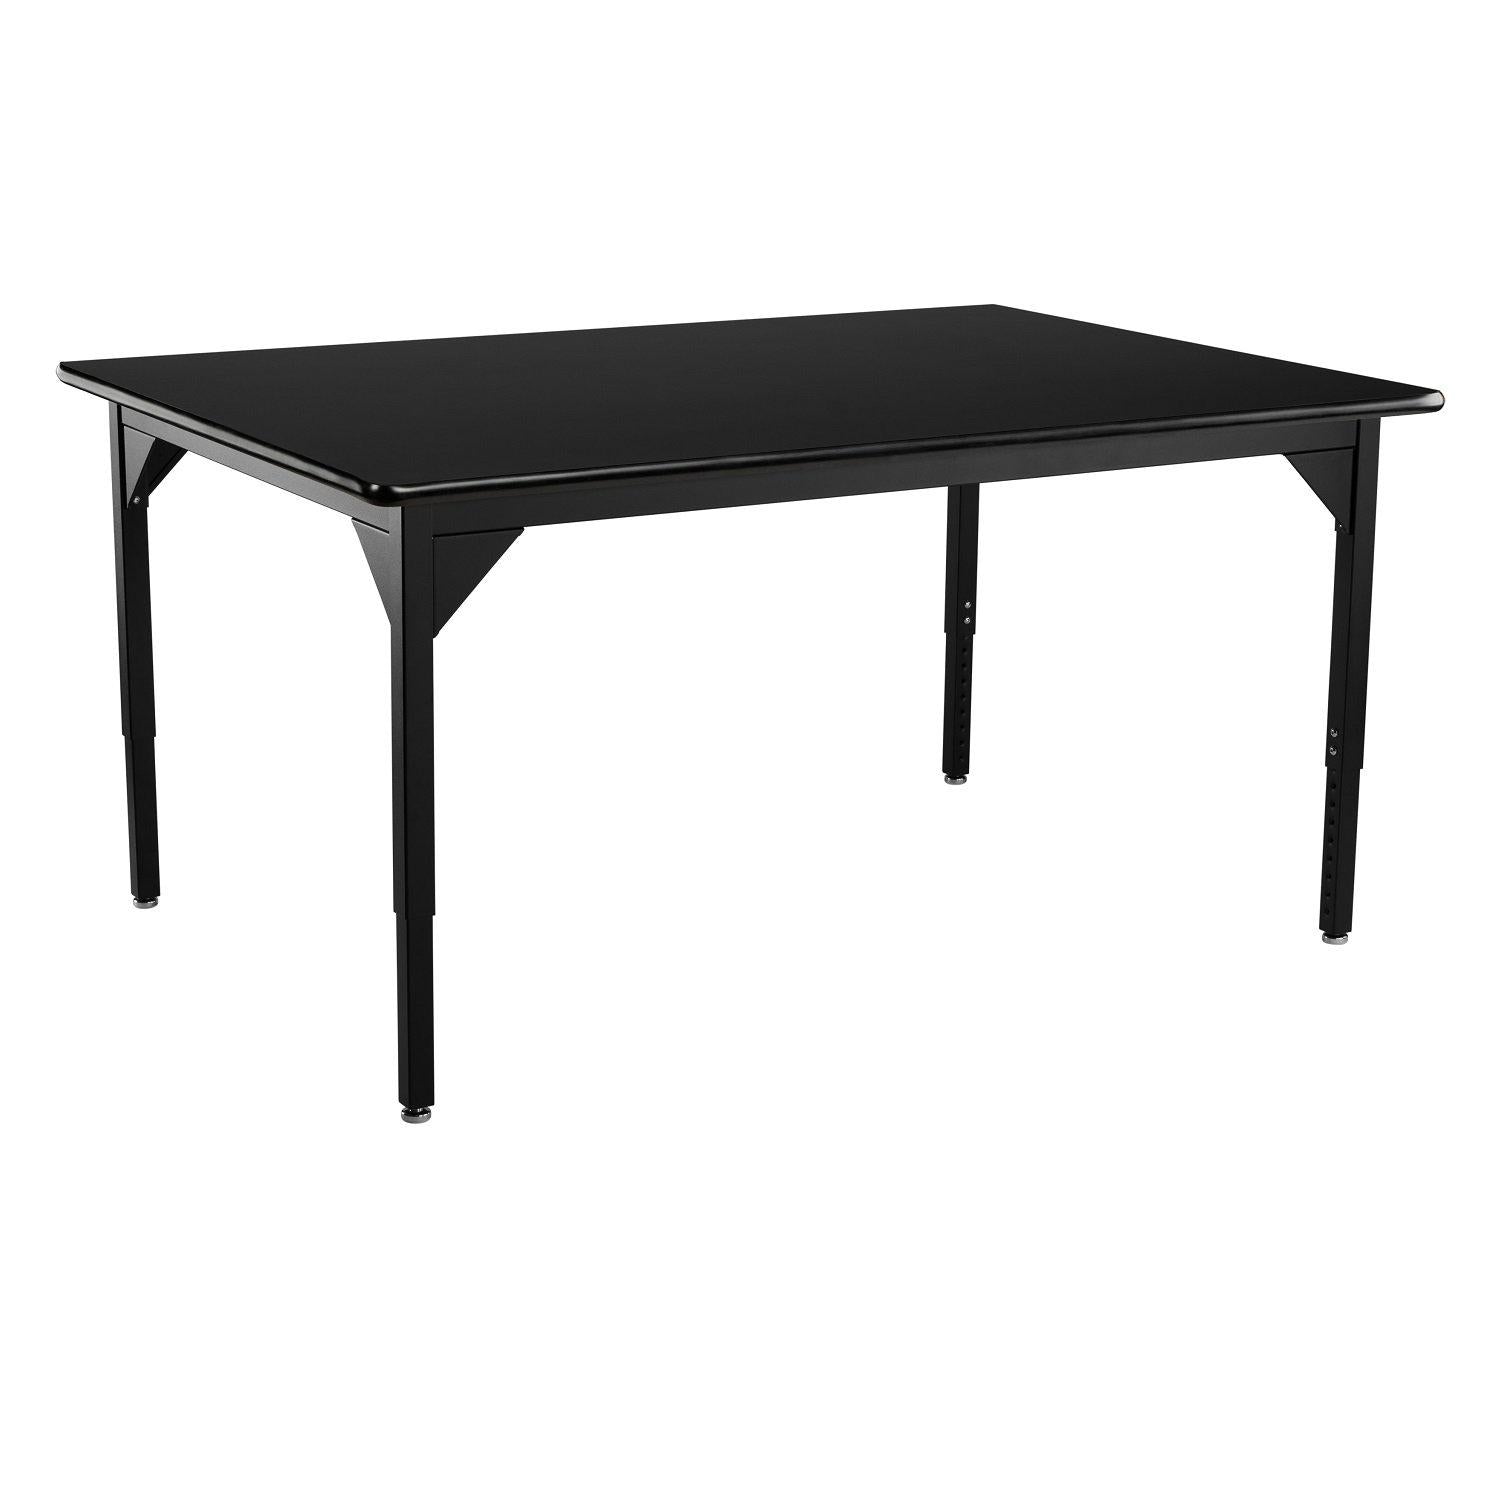 Heavy-Duty Height-Adjustable Utility Table, Black Frame, 48" x 60", High-Pressure Laminate Top with T-Mold Edge